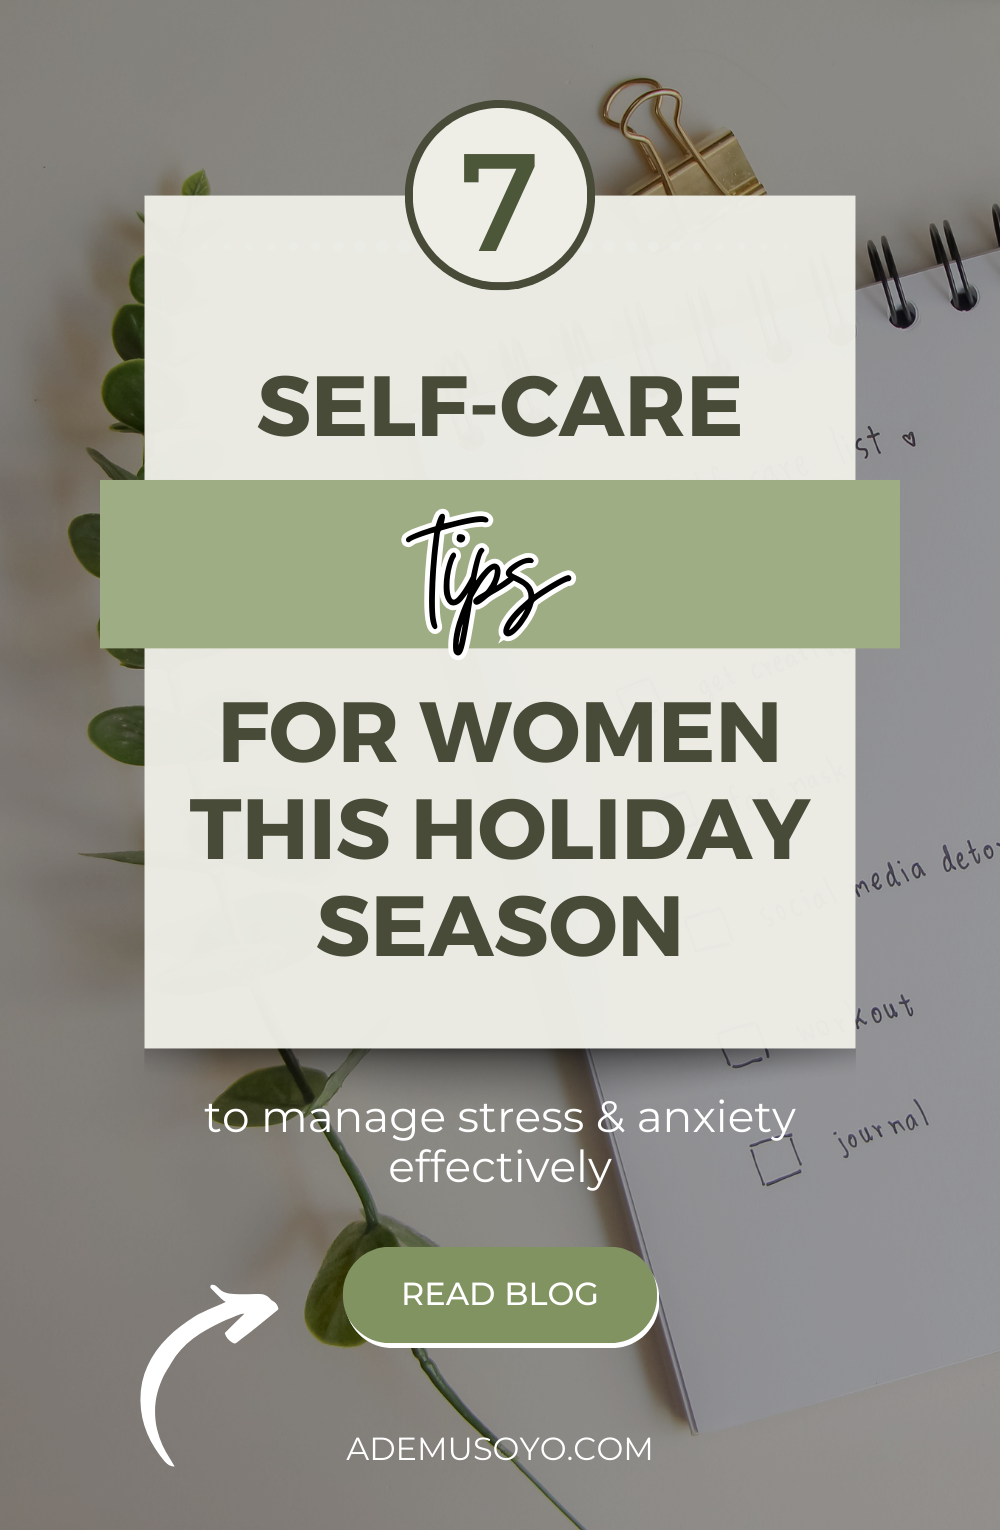 self-care tips for women this holiday season